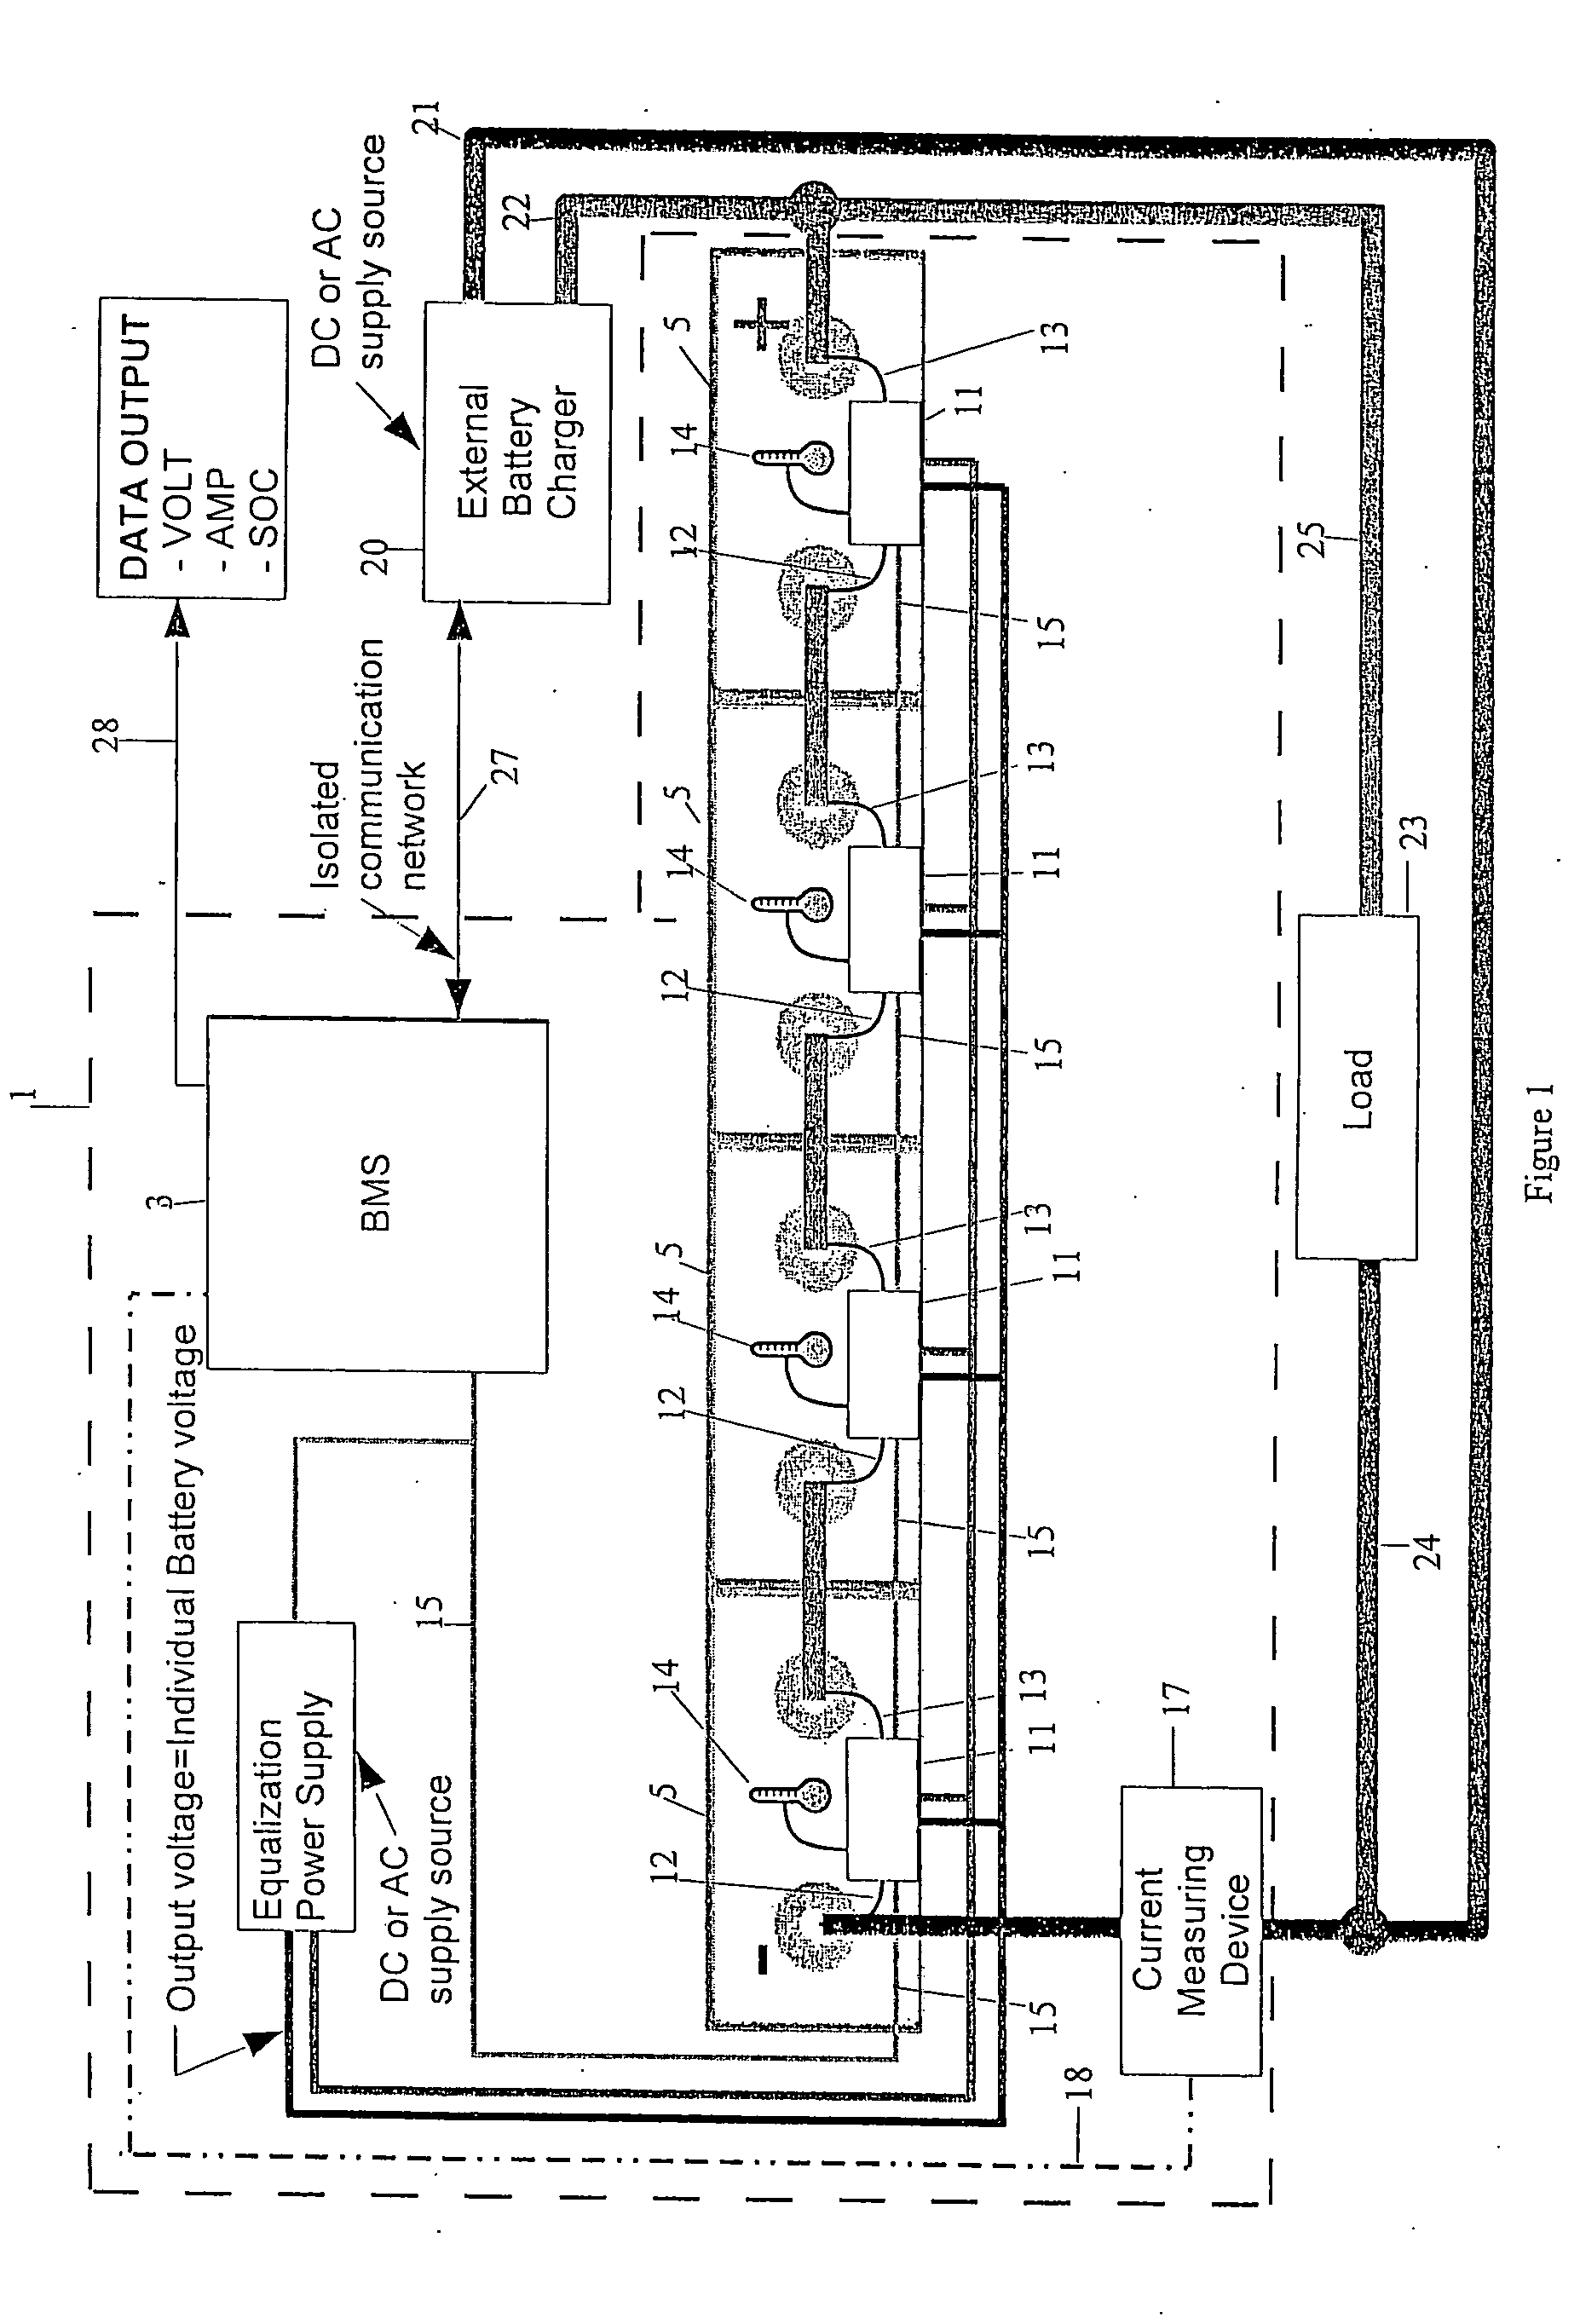 Battery management and equalization system for batteries using power line carrier communications